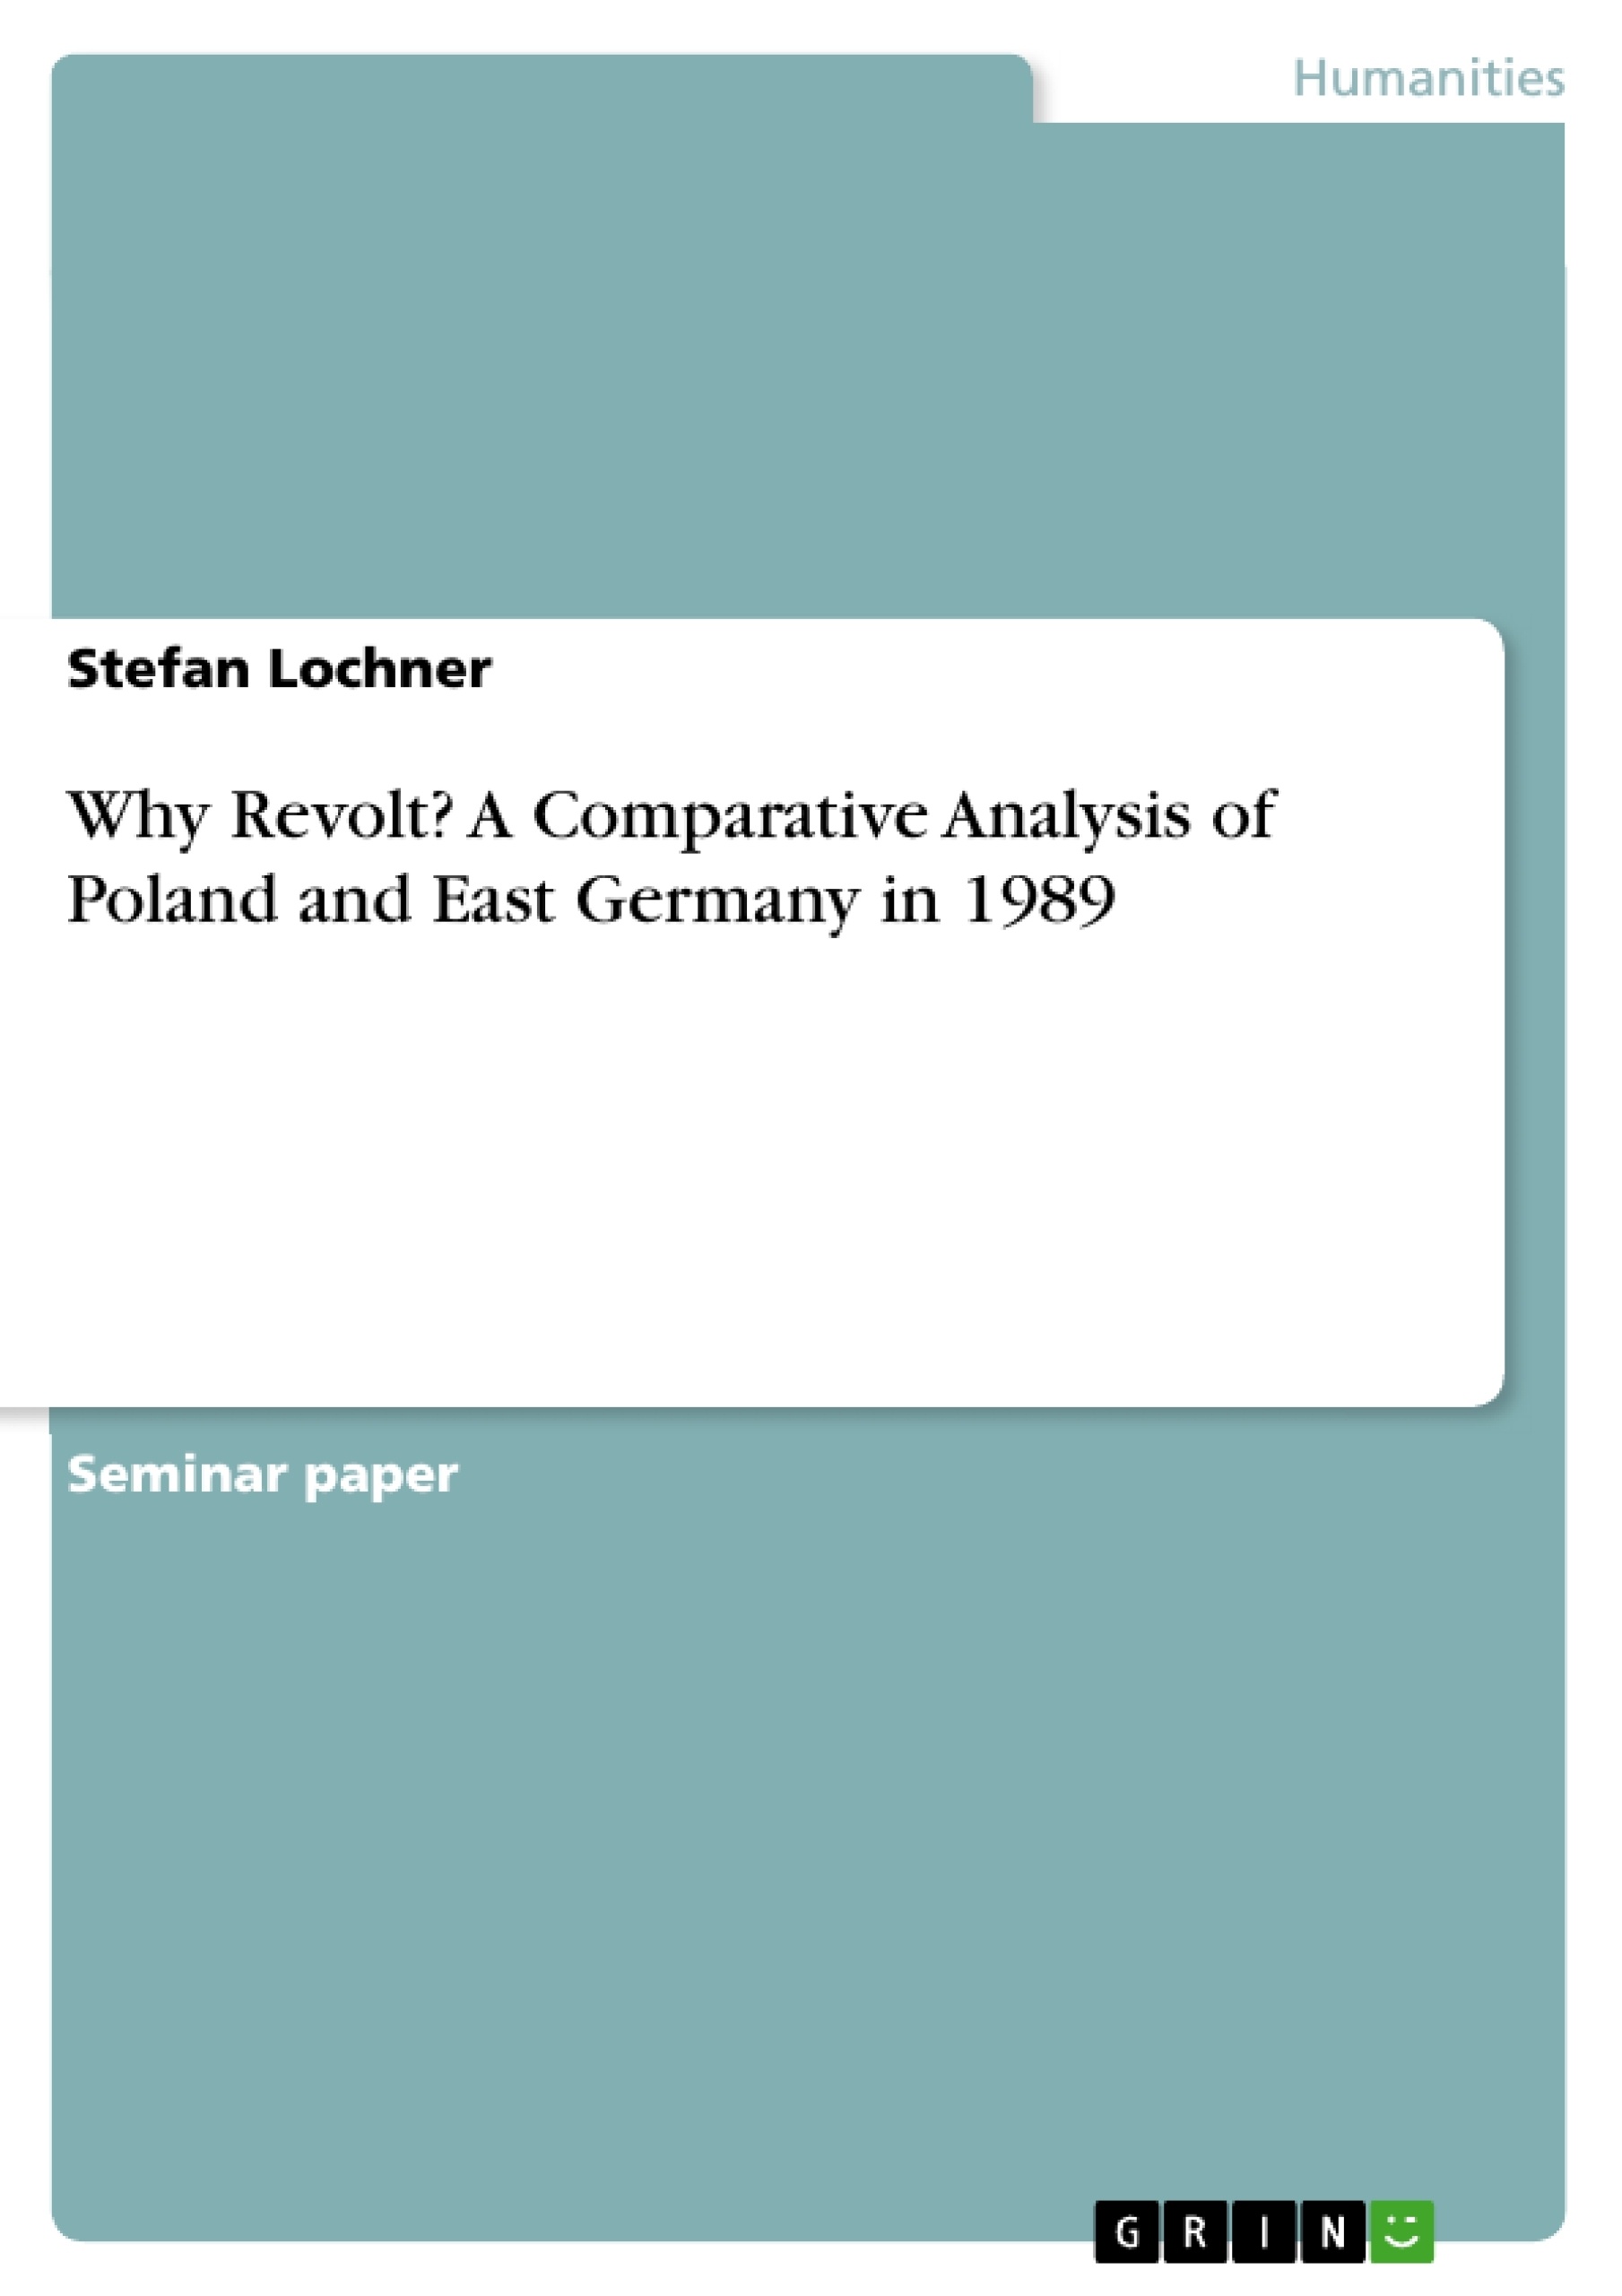 Título: Why Revolt? A Comparative Analysis of Poland and East Germany in 1989